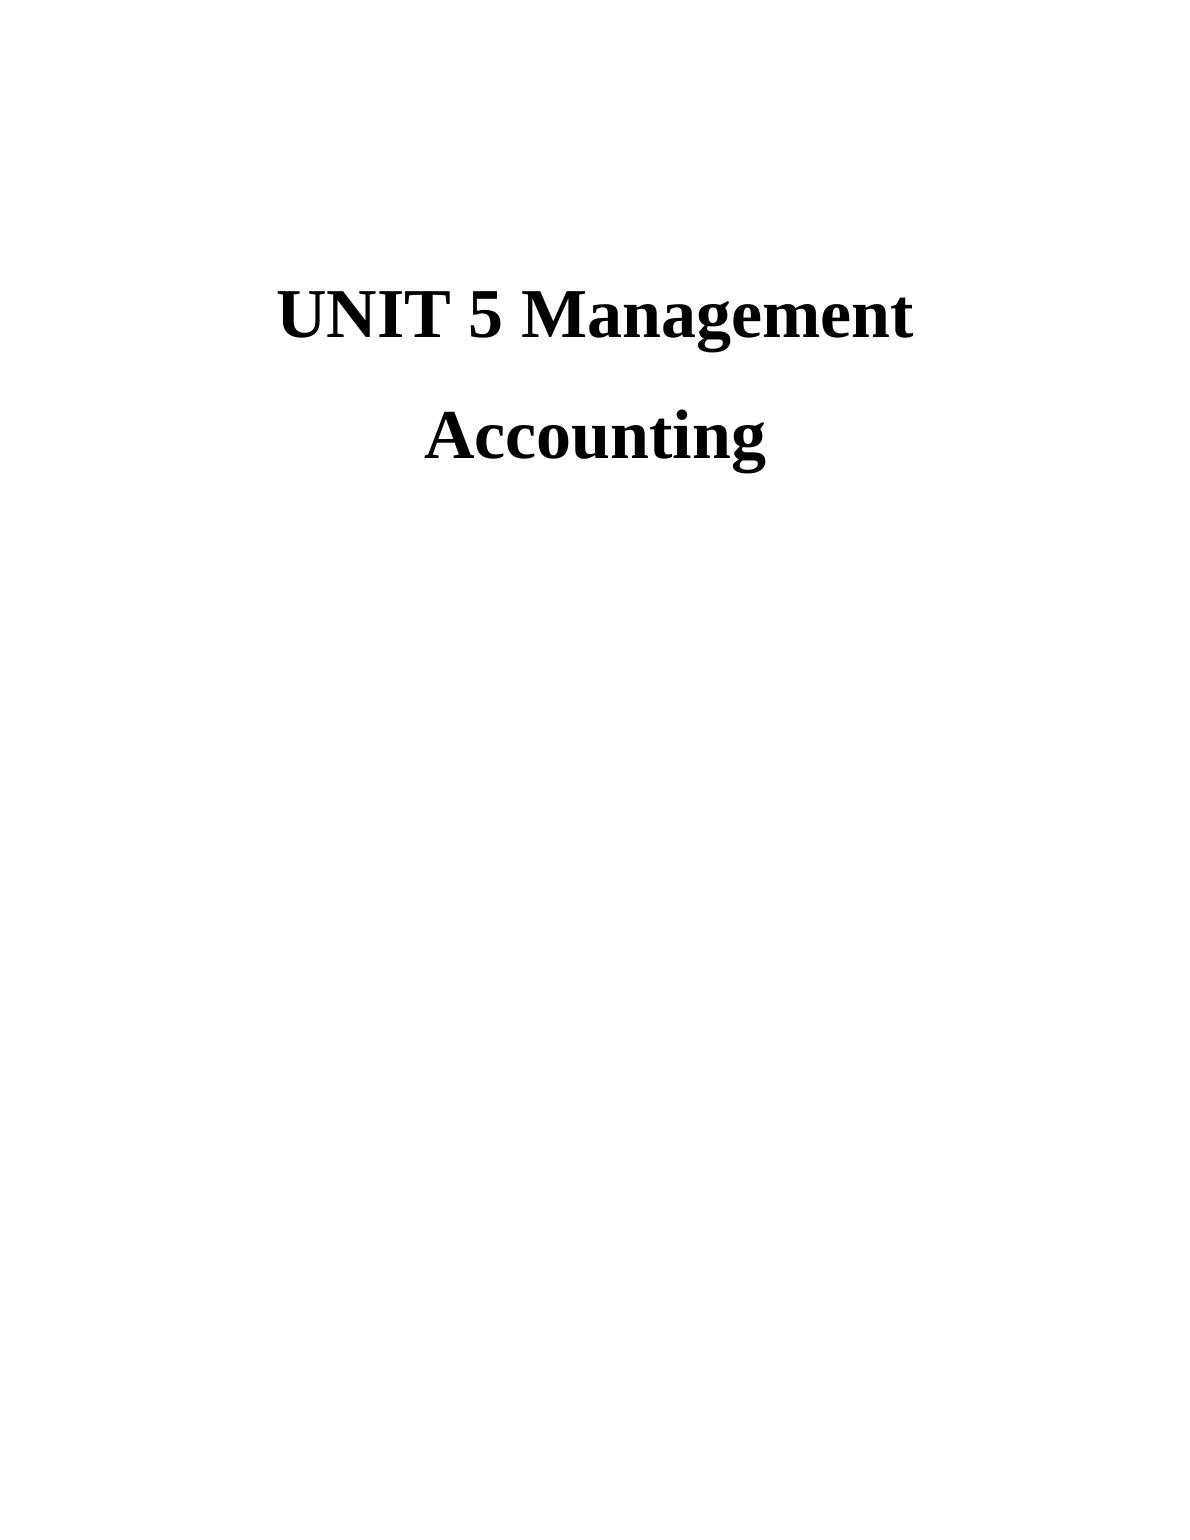 UNIT 5 Management Accounting Assignment Solution - Doc_1